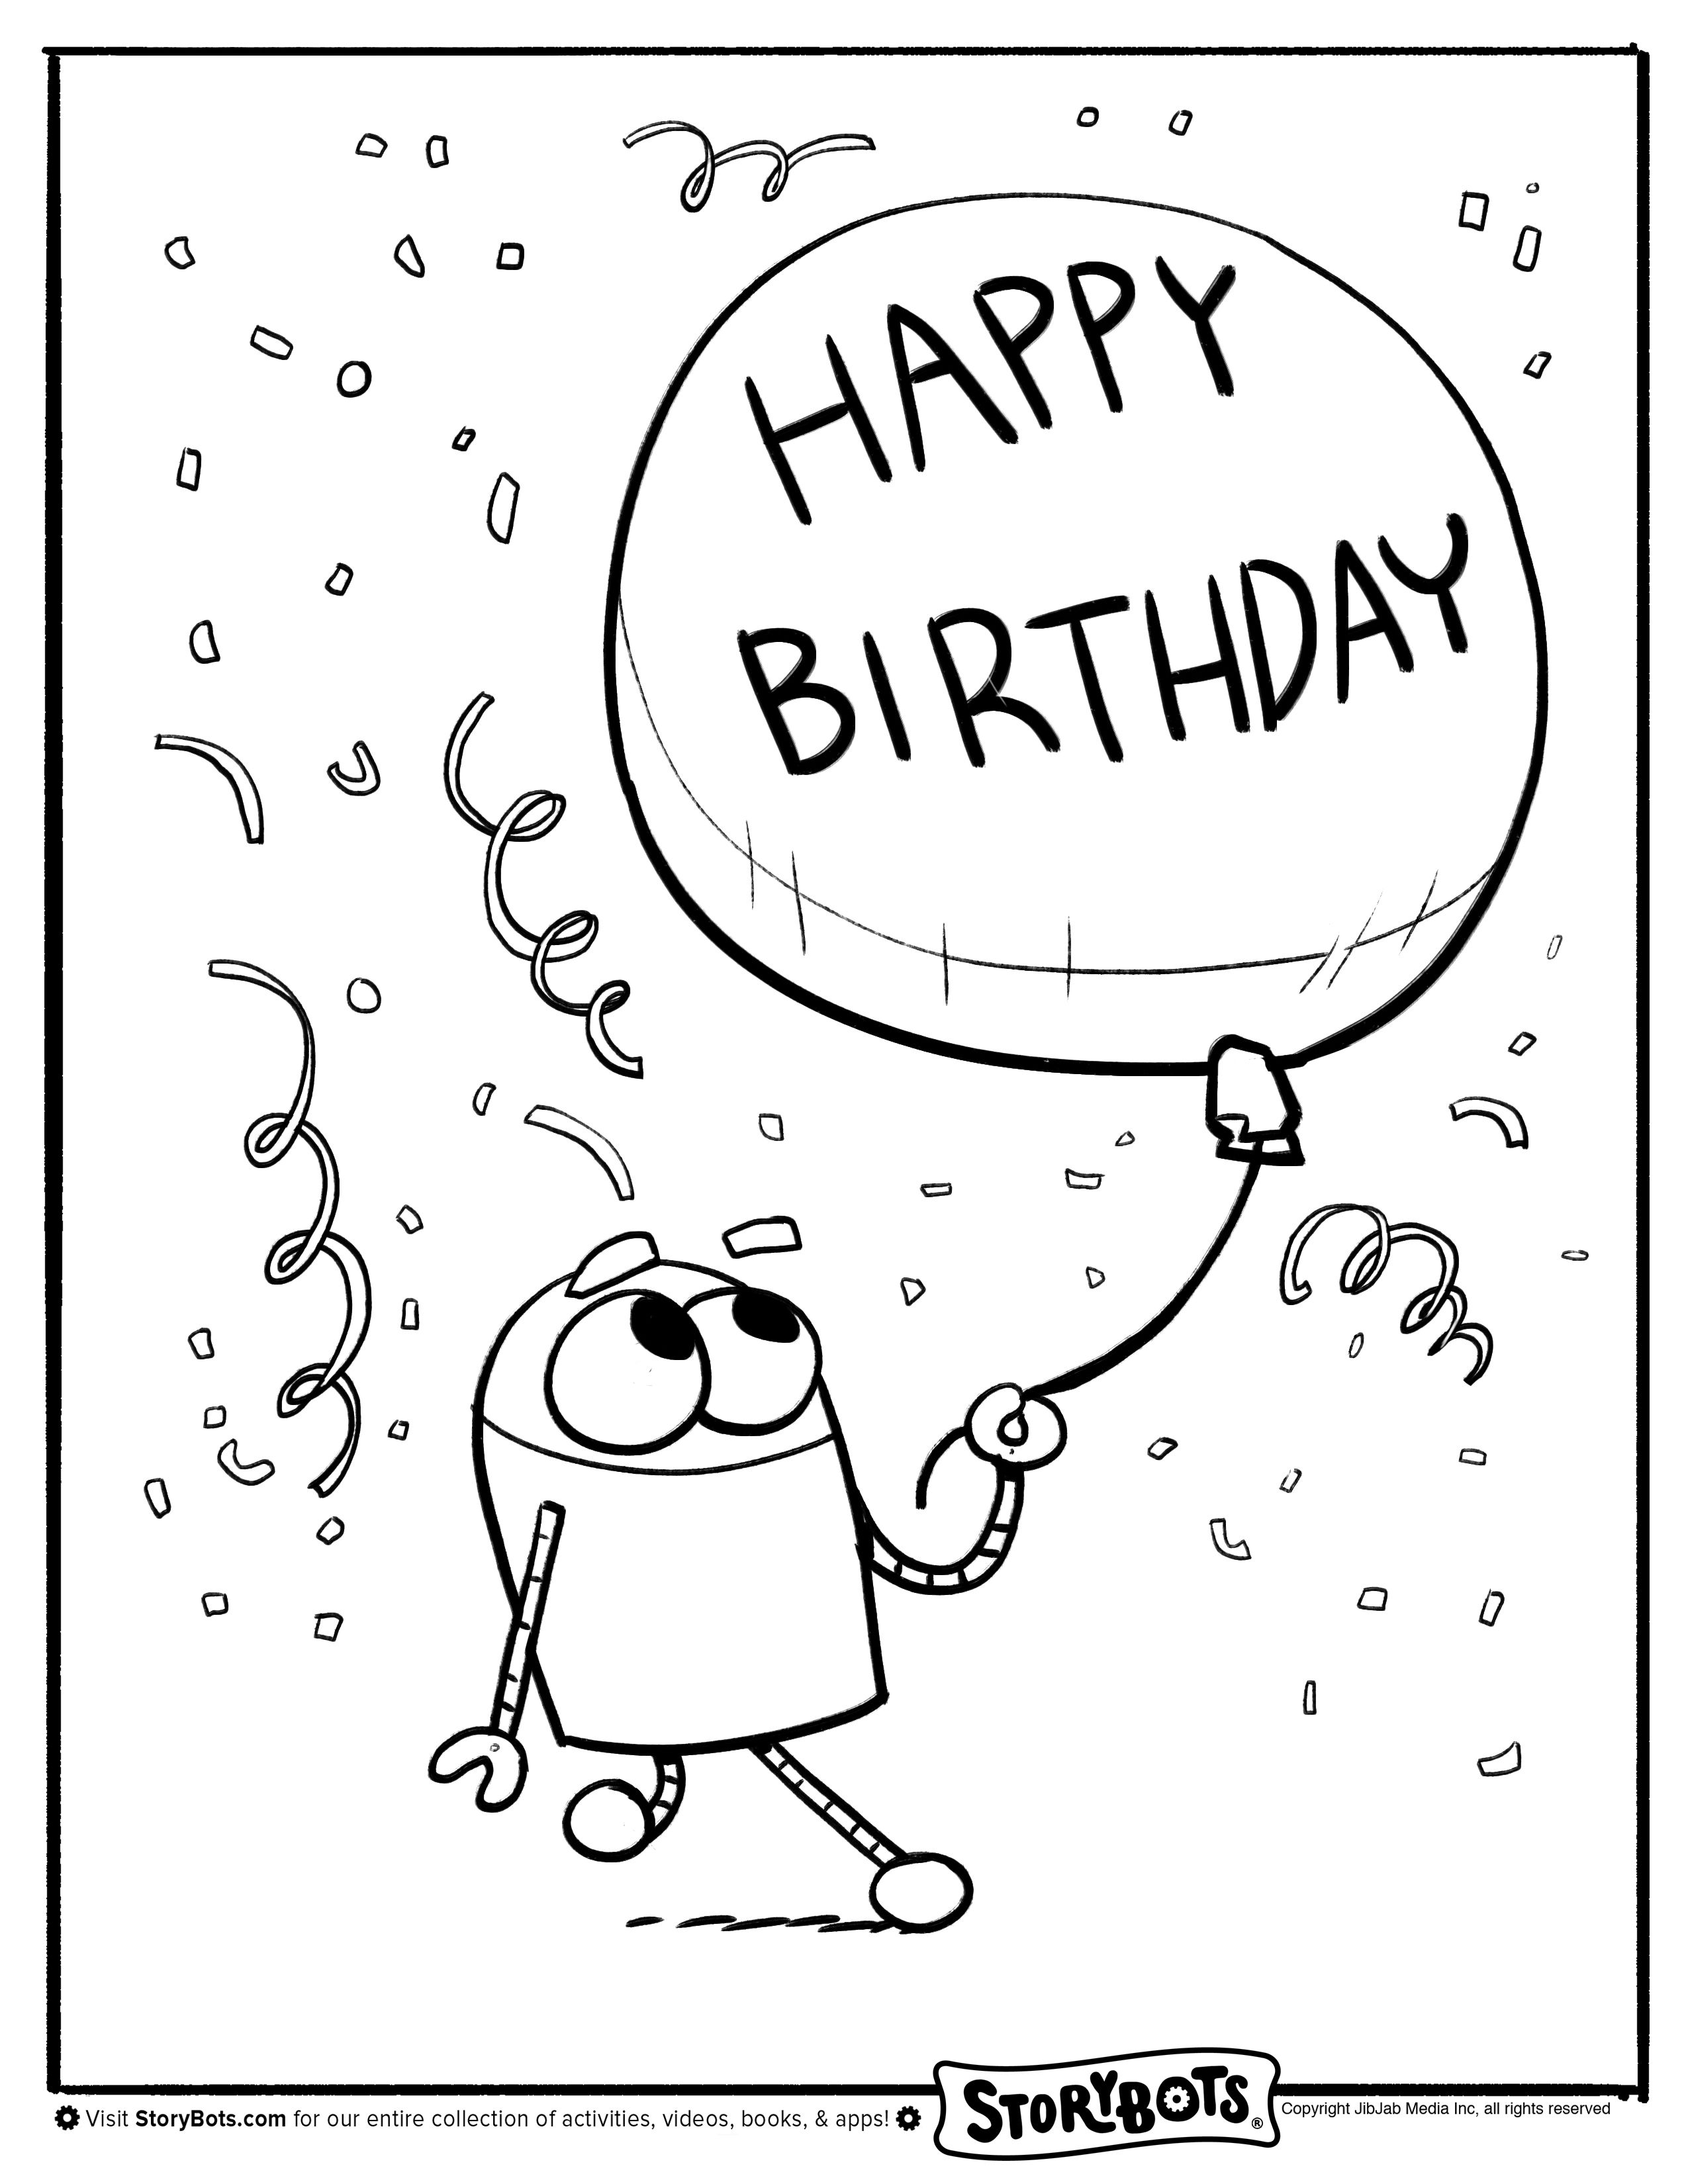 Happy Birthday Storybots Coloring Pages